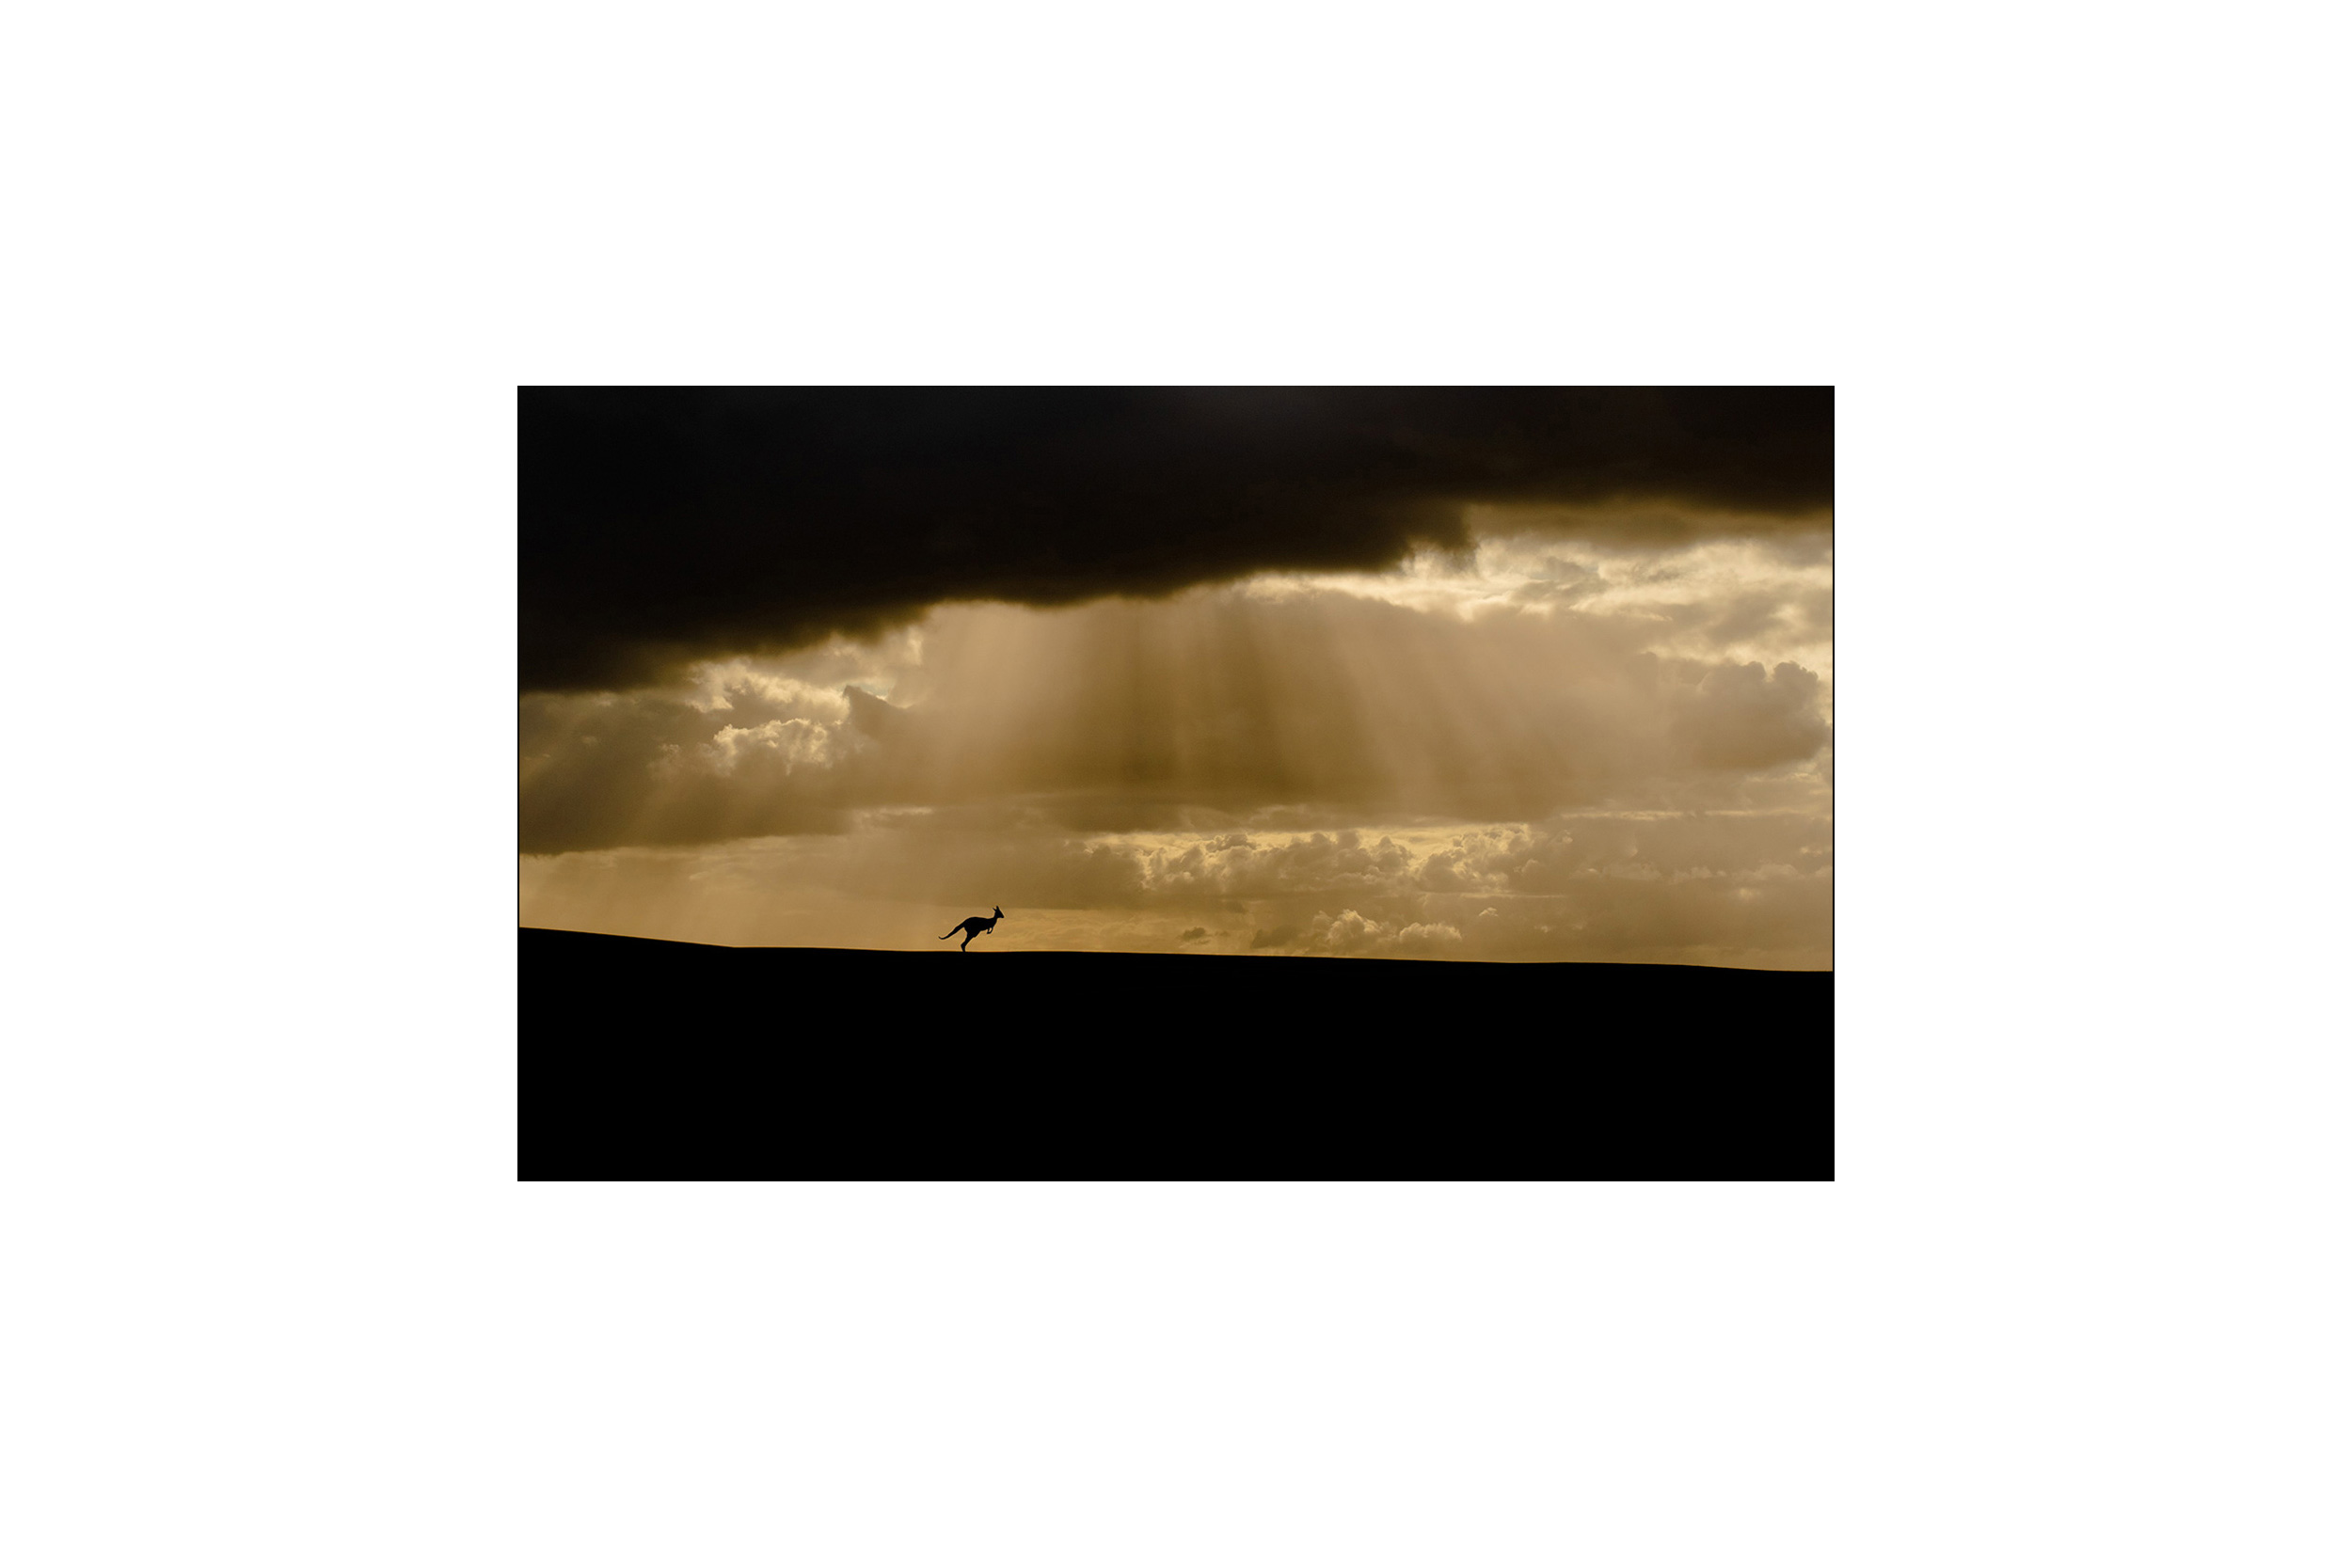 Goodbye Rooby Tuesday. Silhoutte of Kangaroo running through a break in the storm